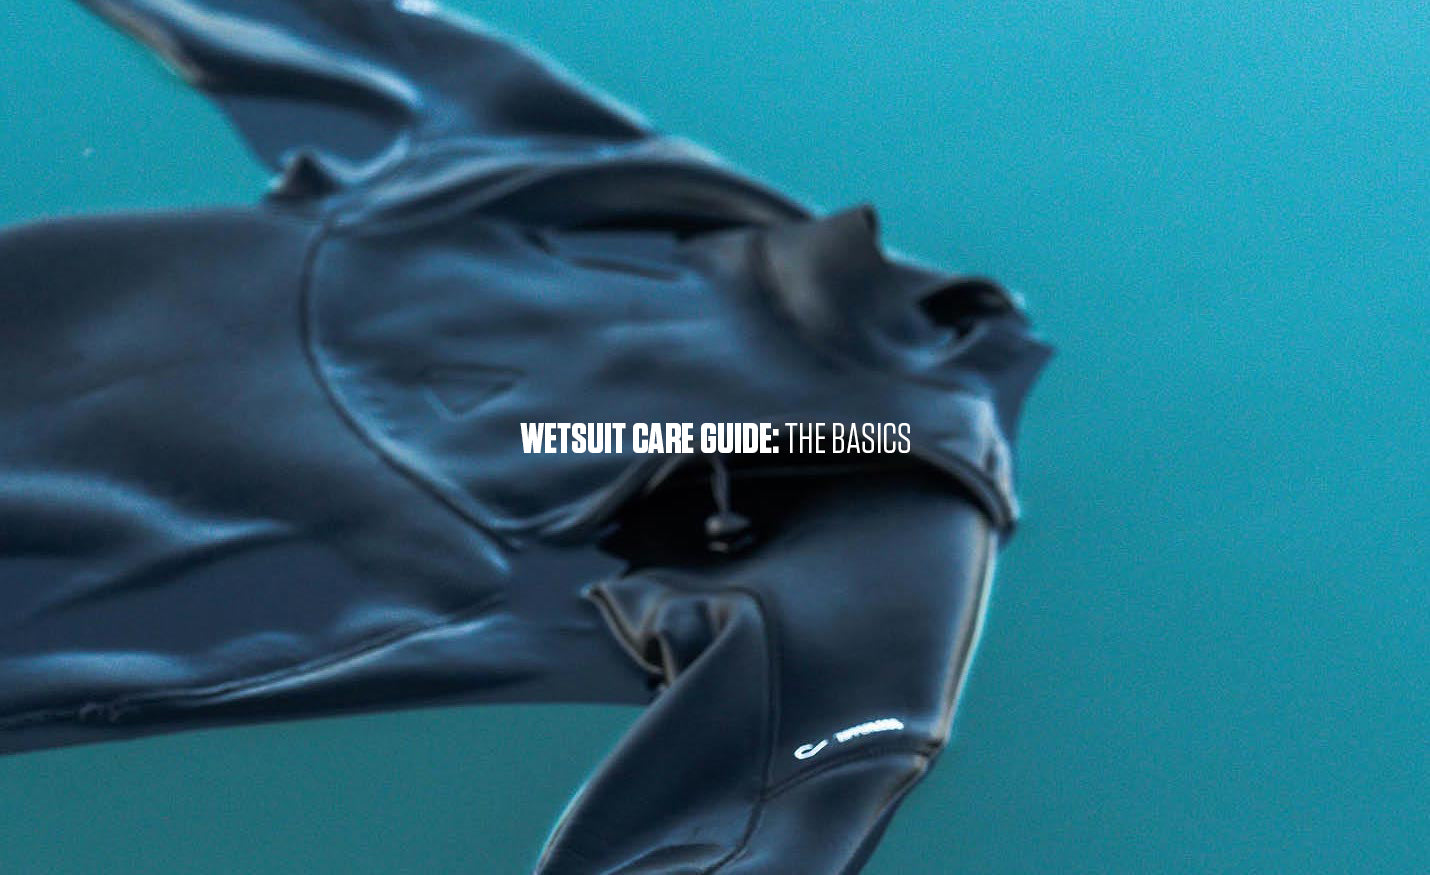 How to take care of your wetsuit, basic maintenance, wetsuit care